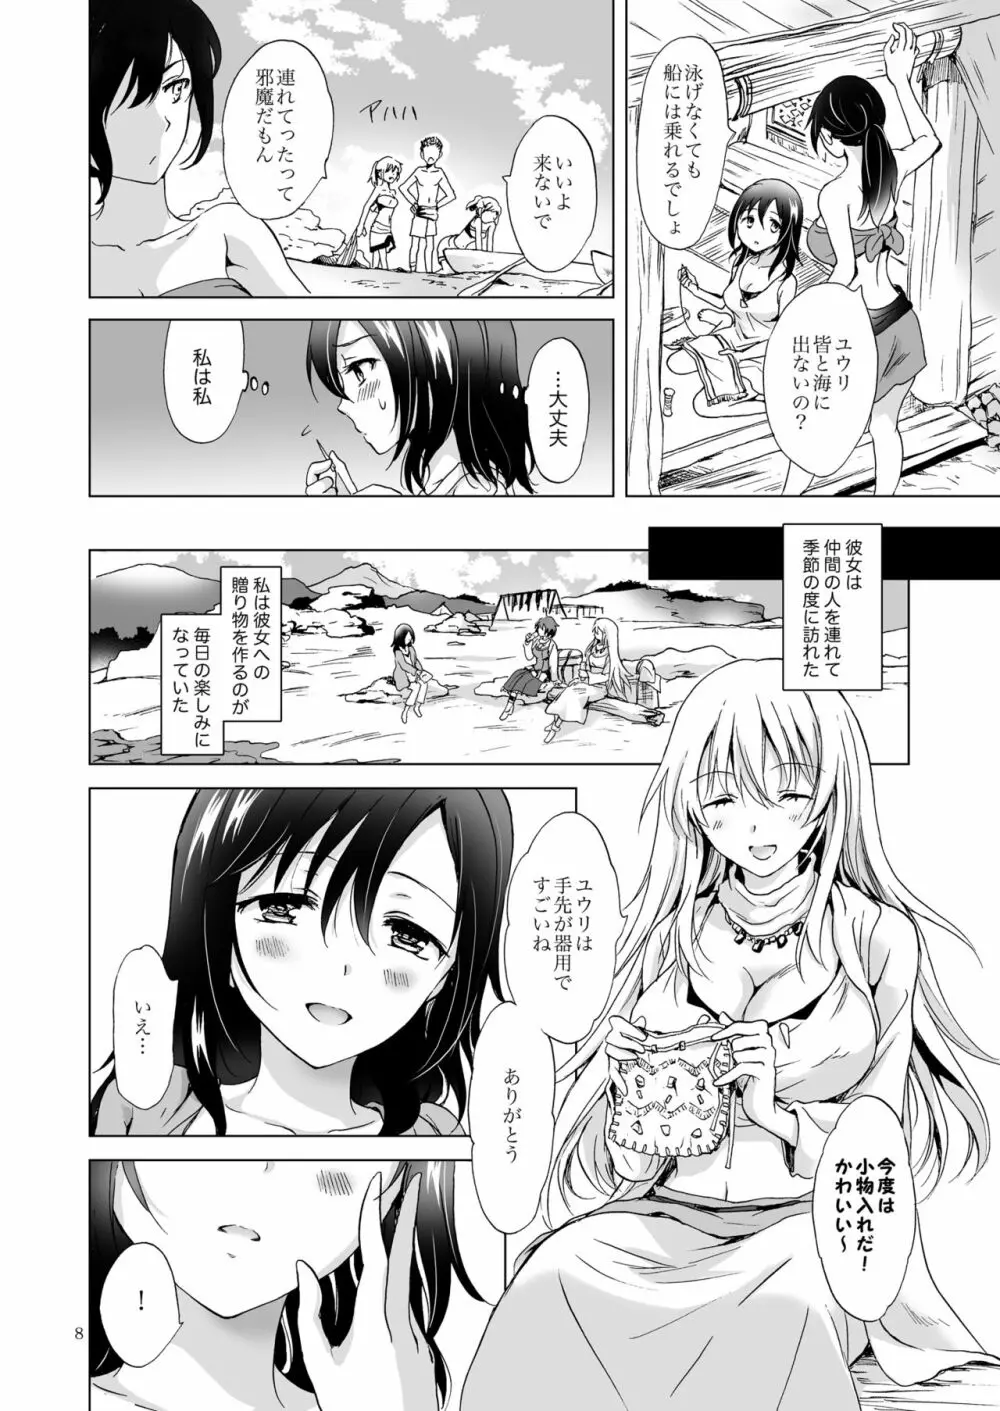 EARTH GIRLS 紡 - page7